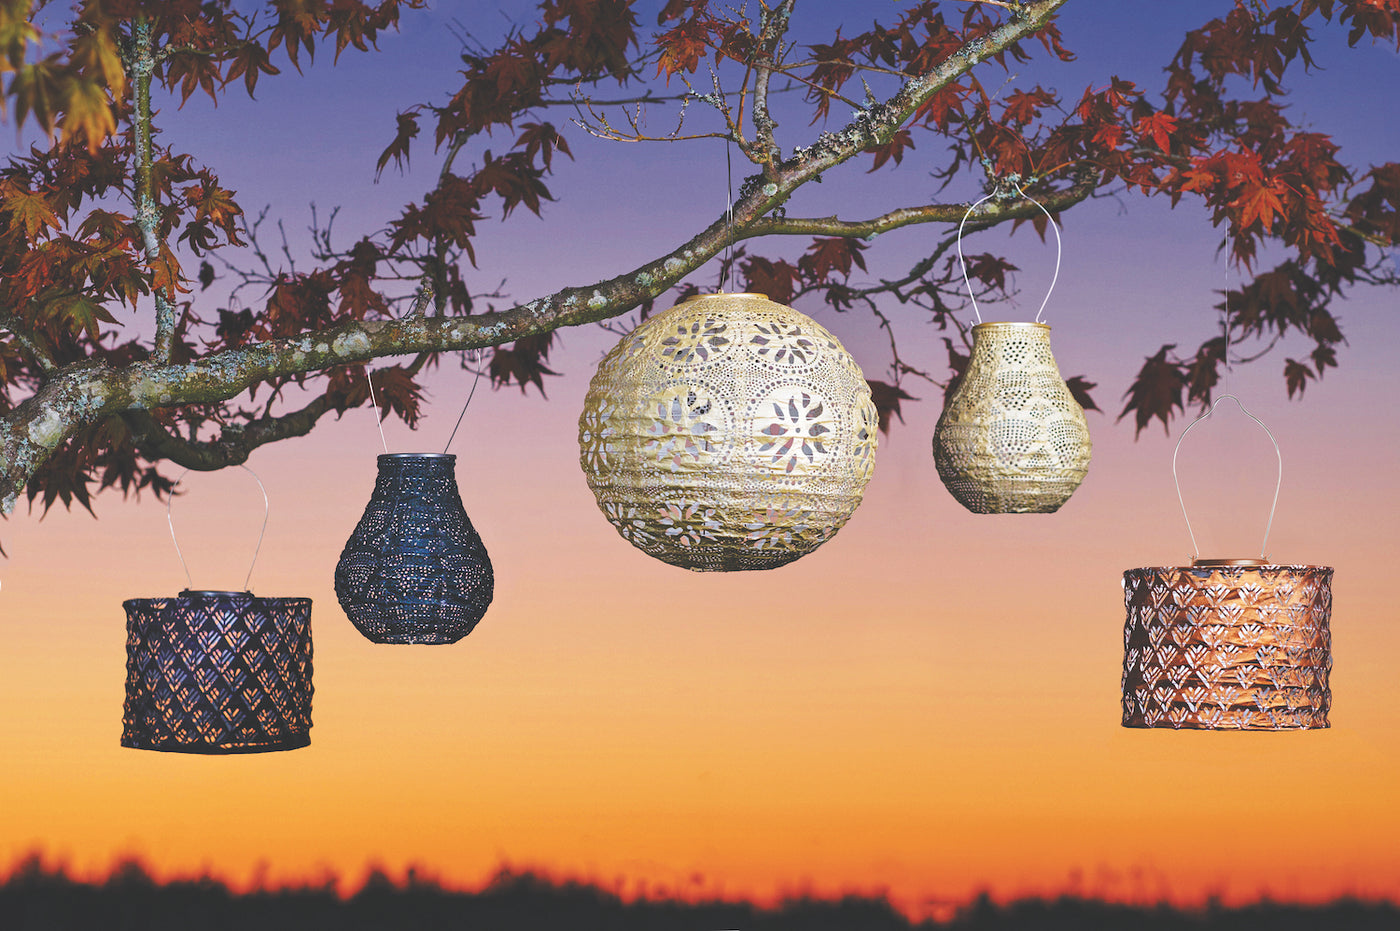 THE LAST LANTERN YOU WILL NEED! SOJI LANTERNS MADE FROM TYVEK MATERIAL